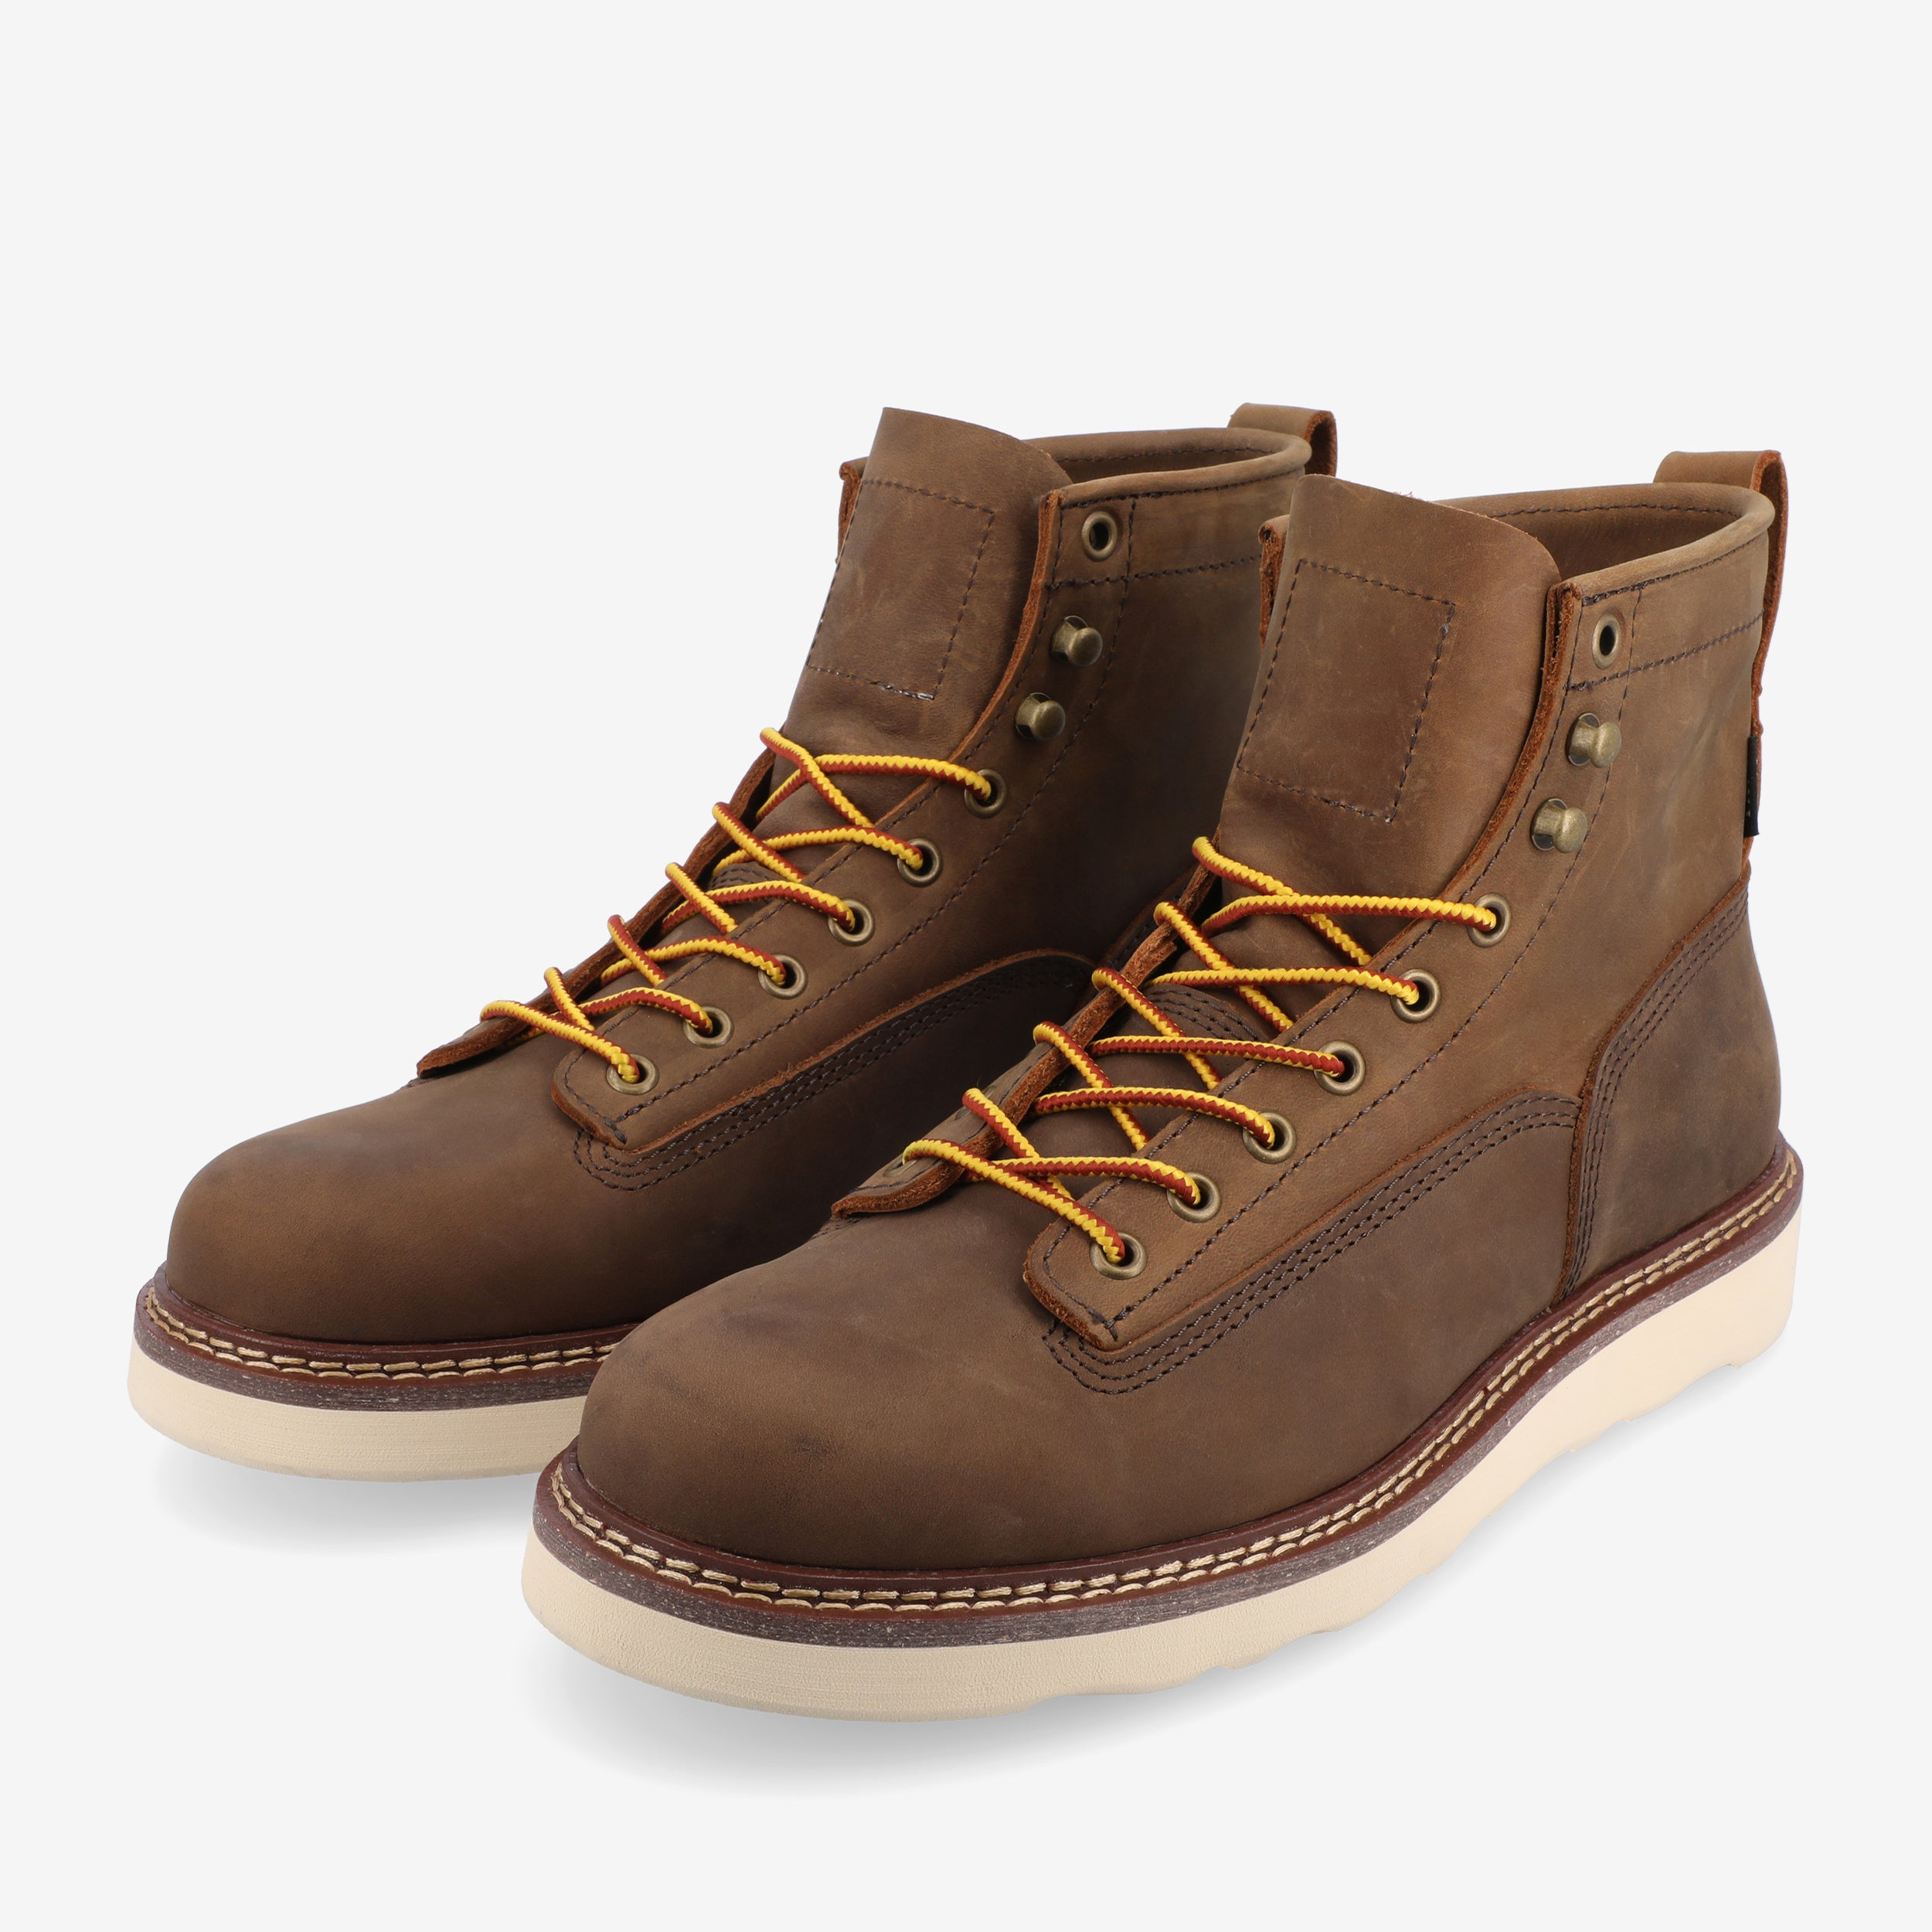 Model 001 Boot In Chocolate (Final Sale)